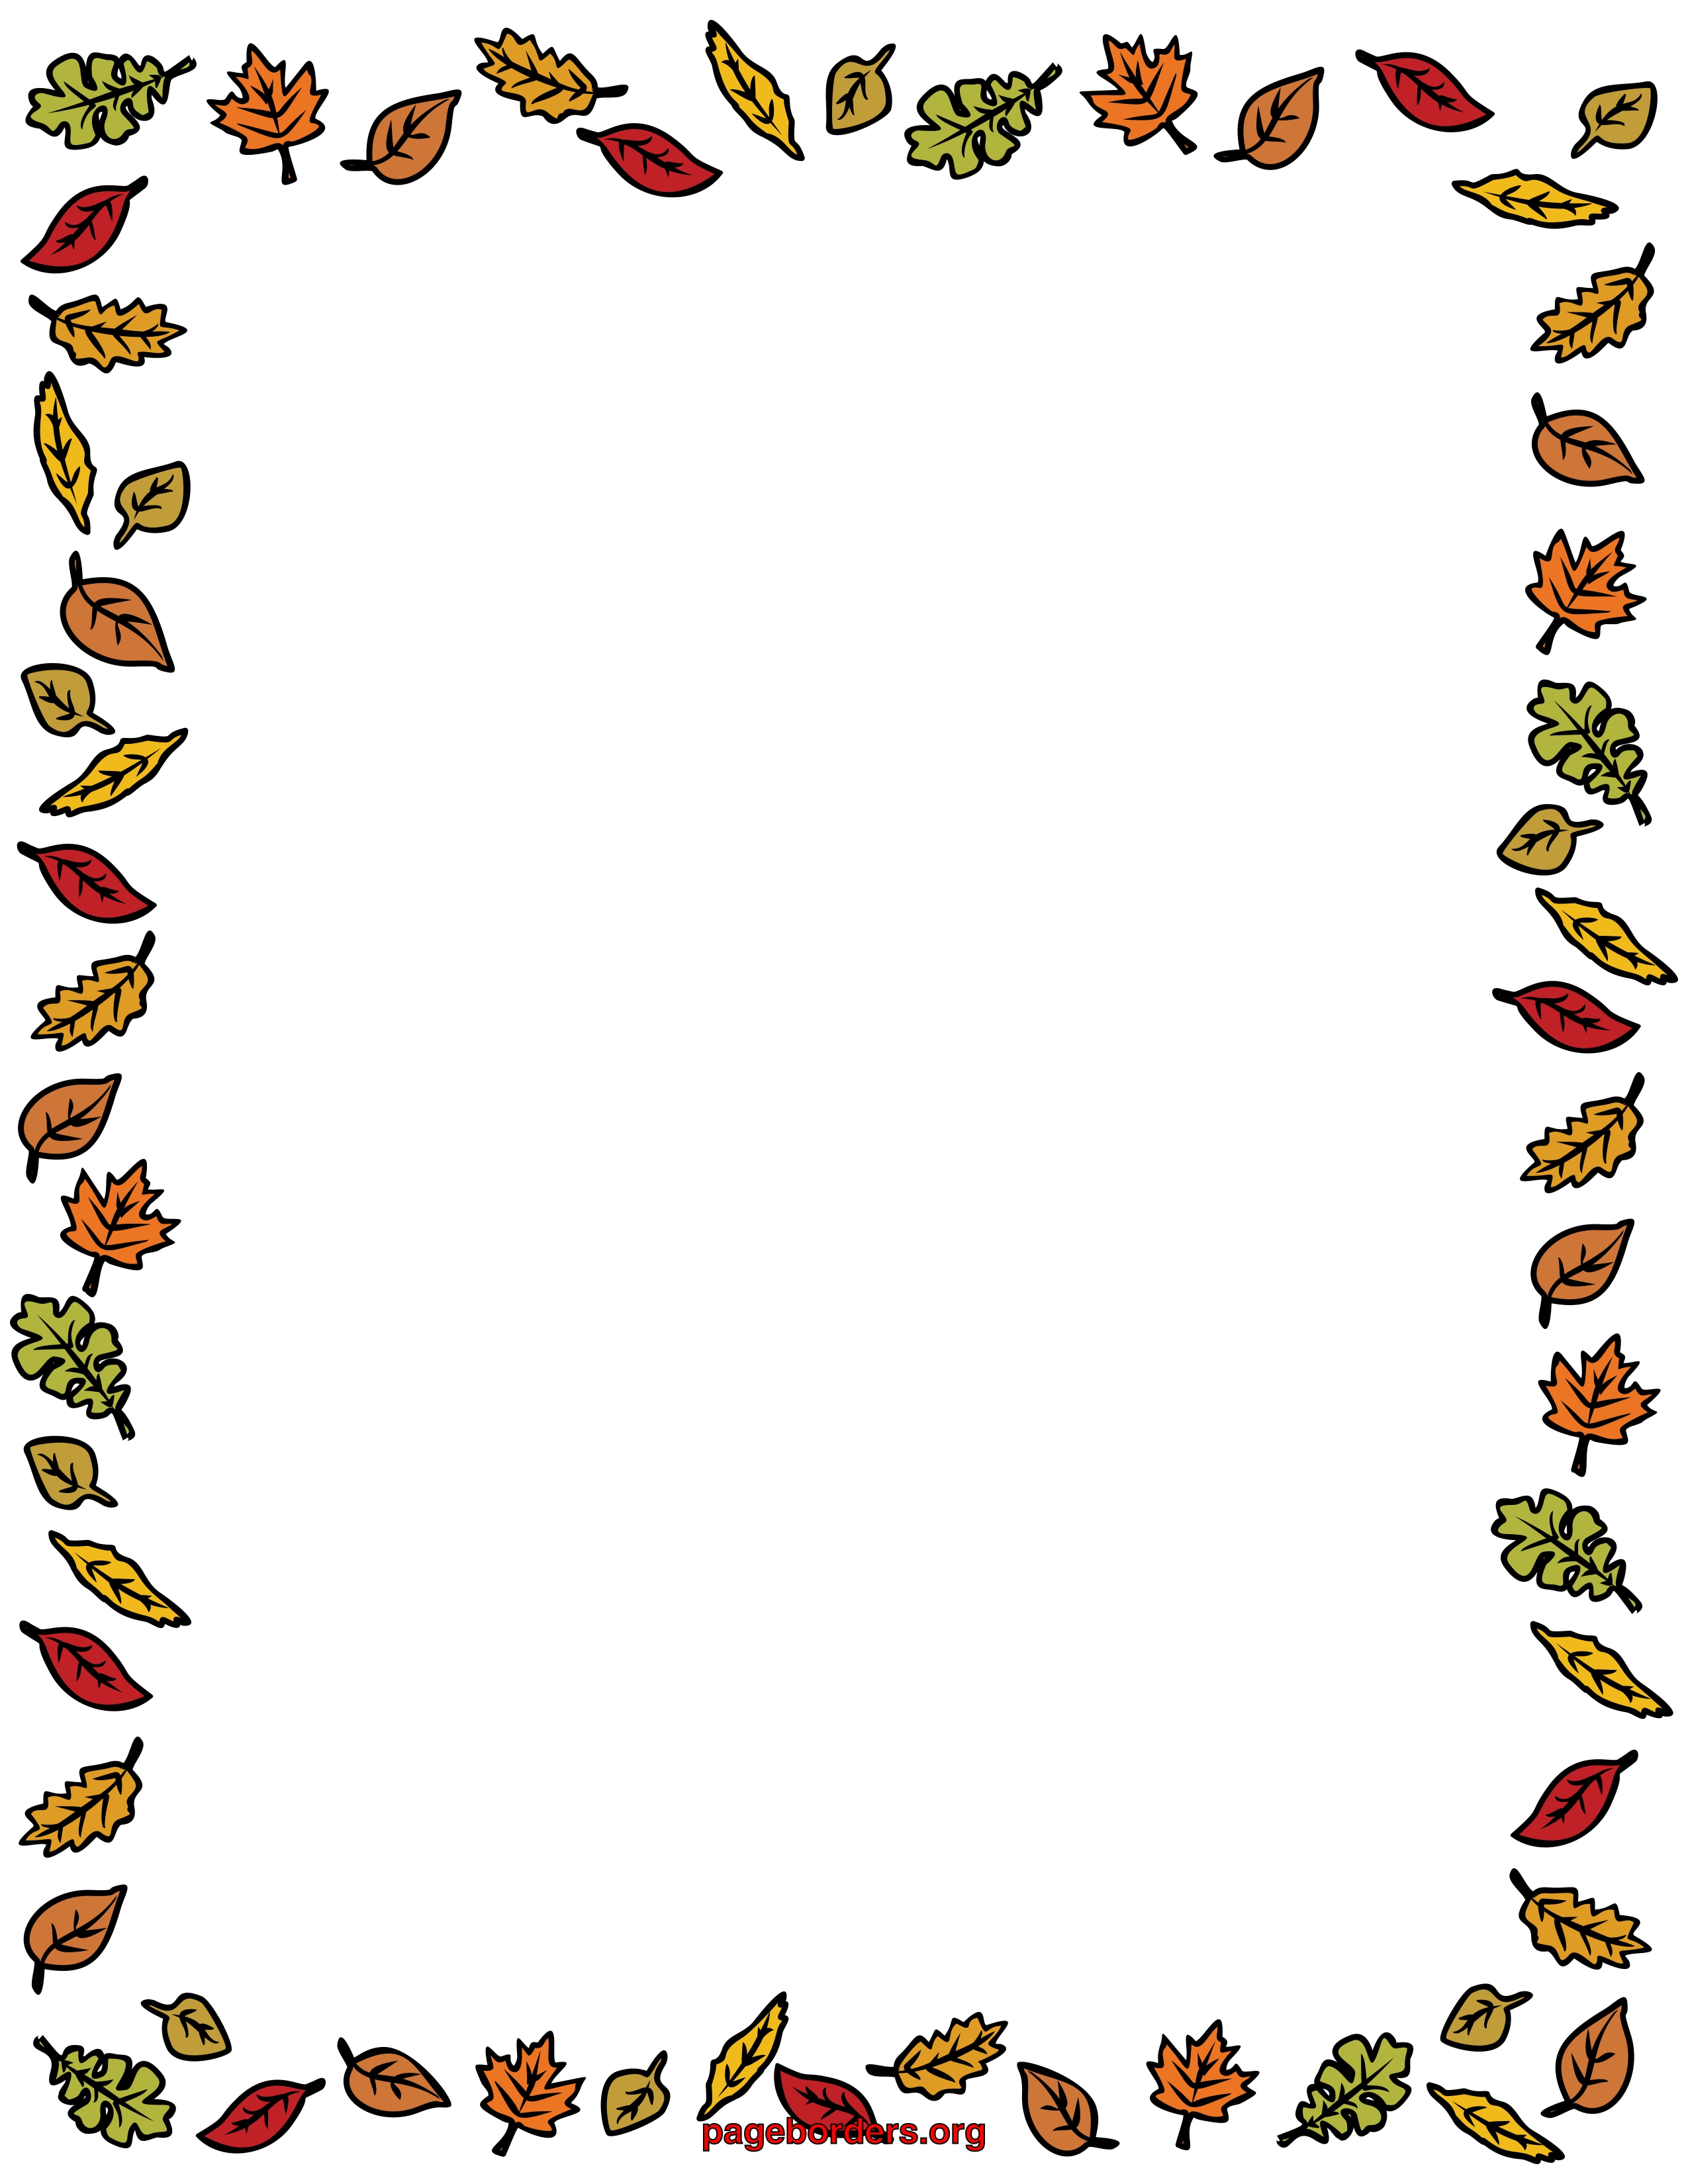 Fall Leaves Border Clipart Cl